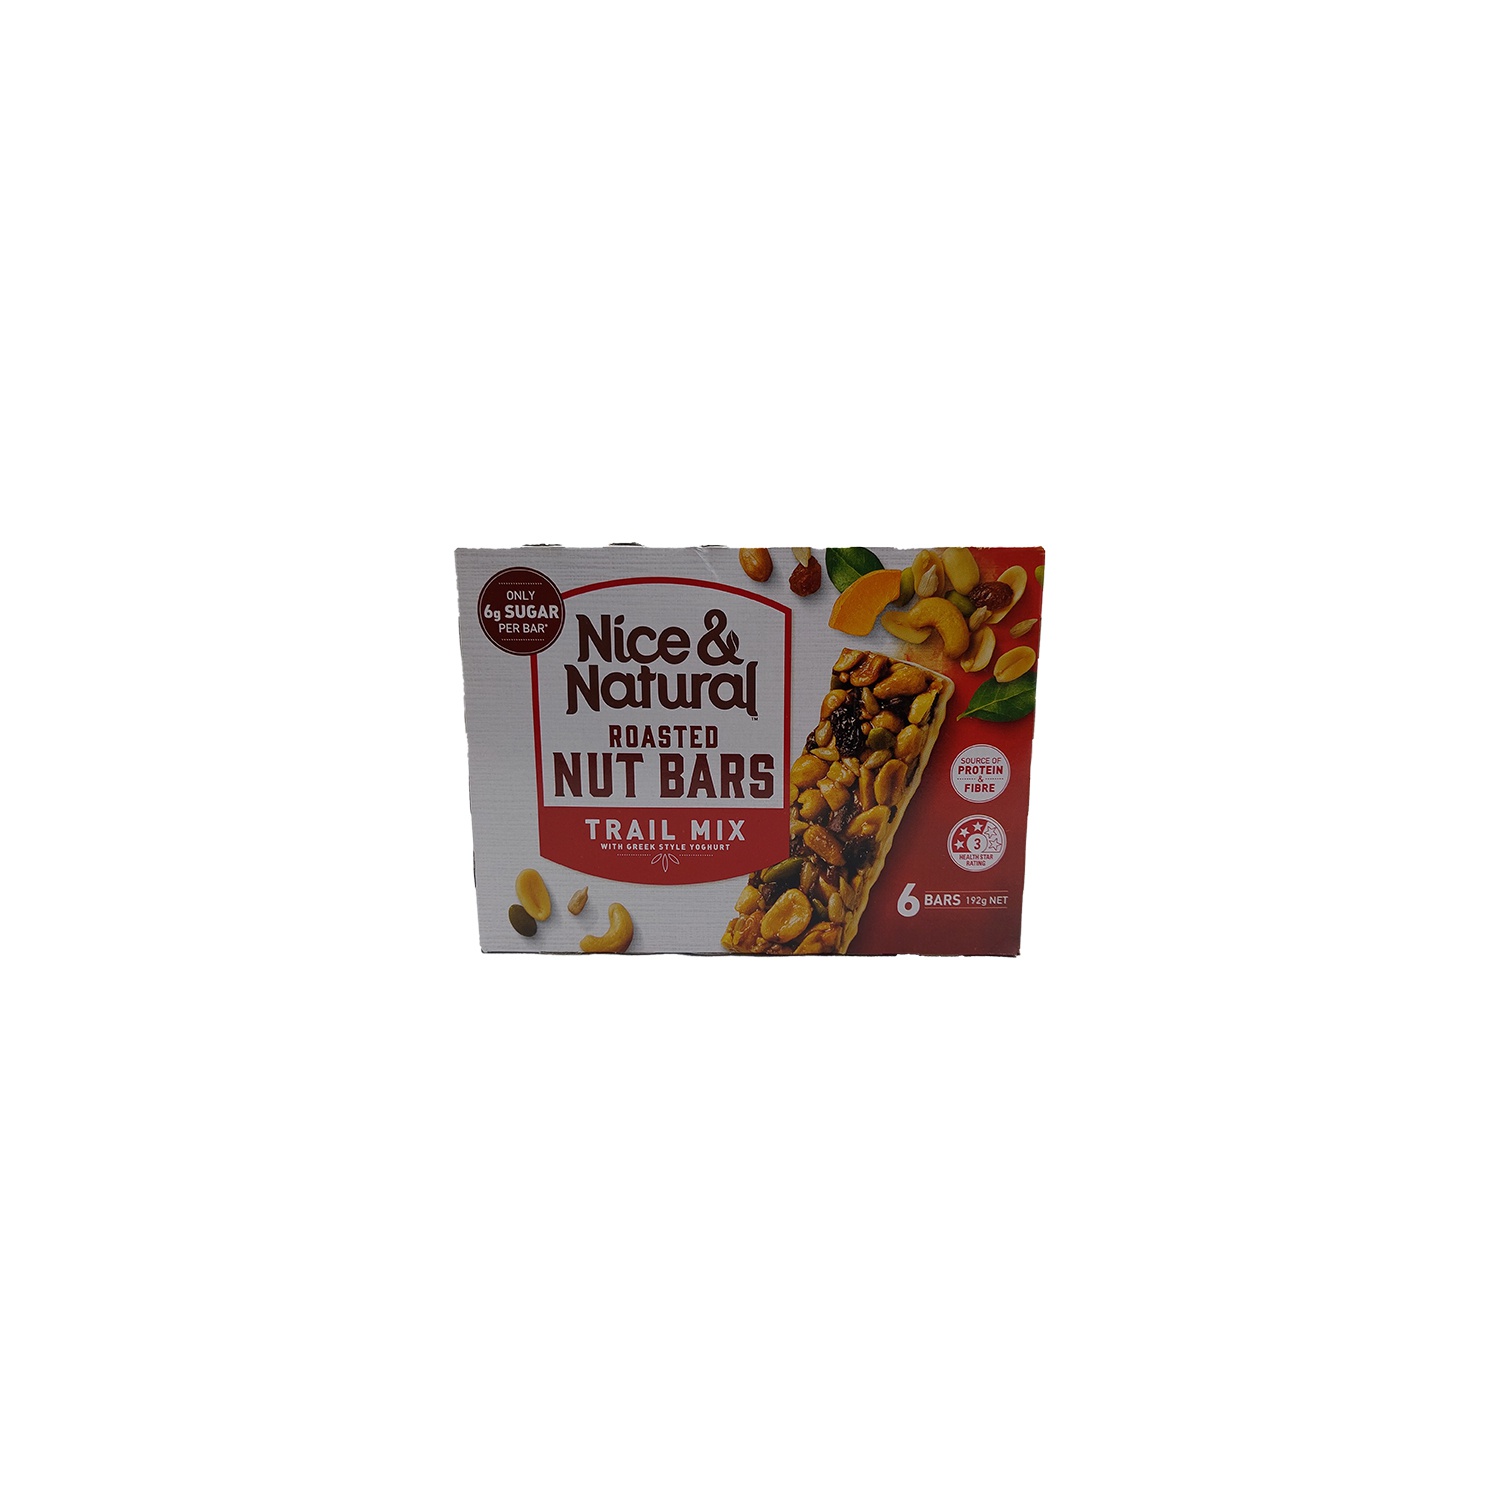 Nice & Natural Roasted Nut Bars Trail Mix 192G - NICE & NATURAL - Cereals - in Sri Lanka